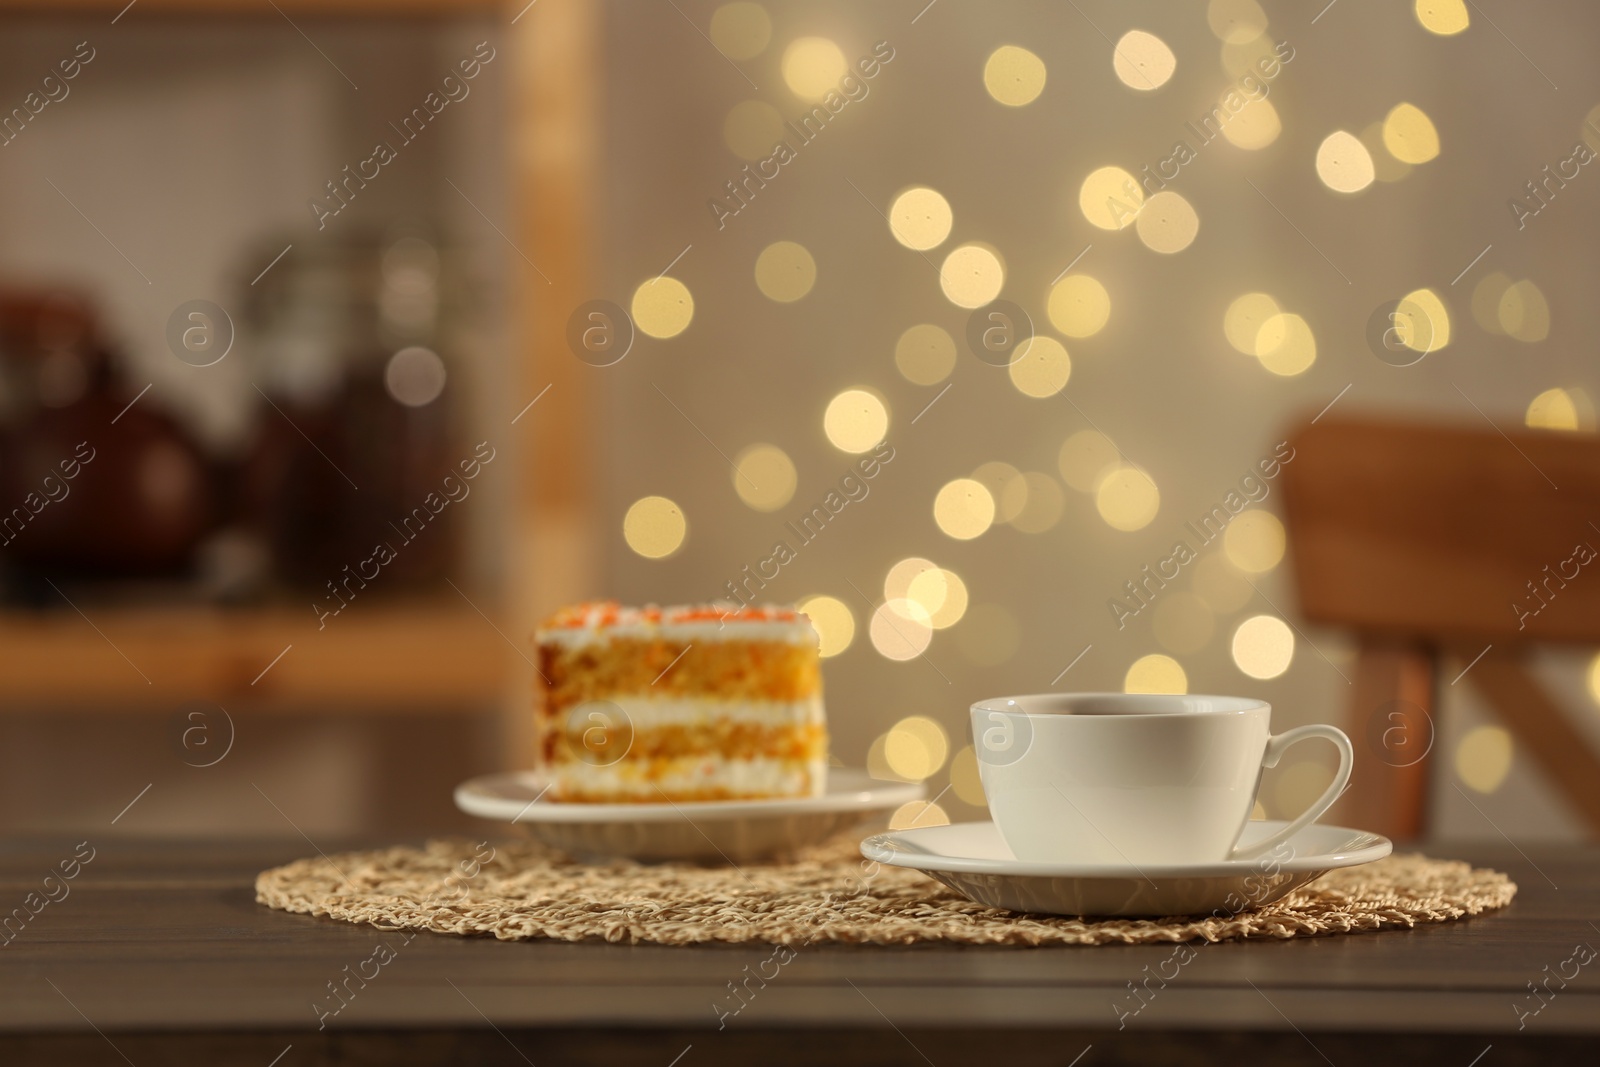 Photo of Hot drink in cup and piece of cake on wooden table against blurred lights indoors